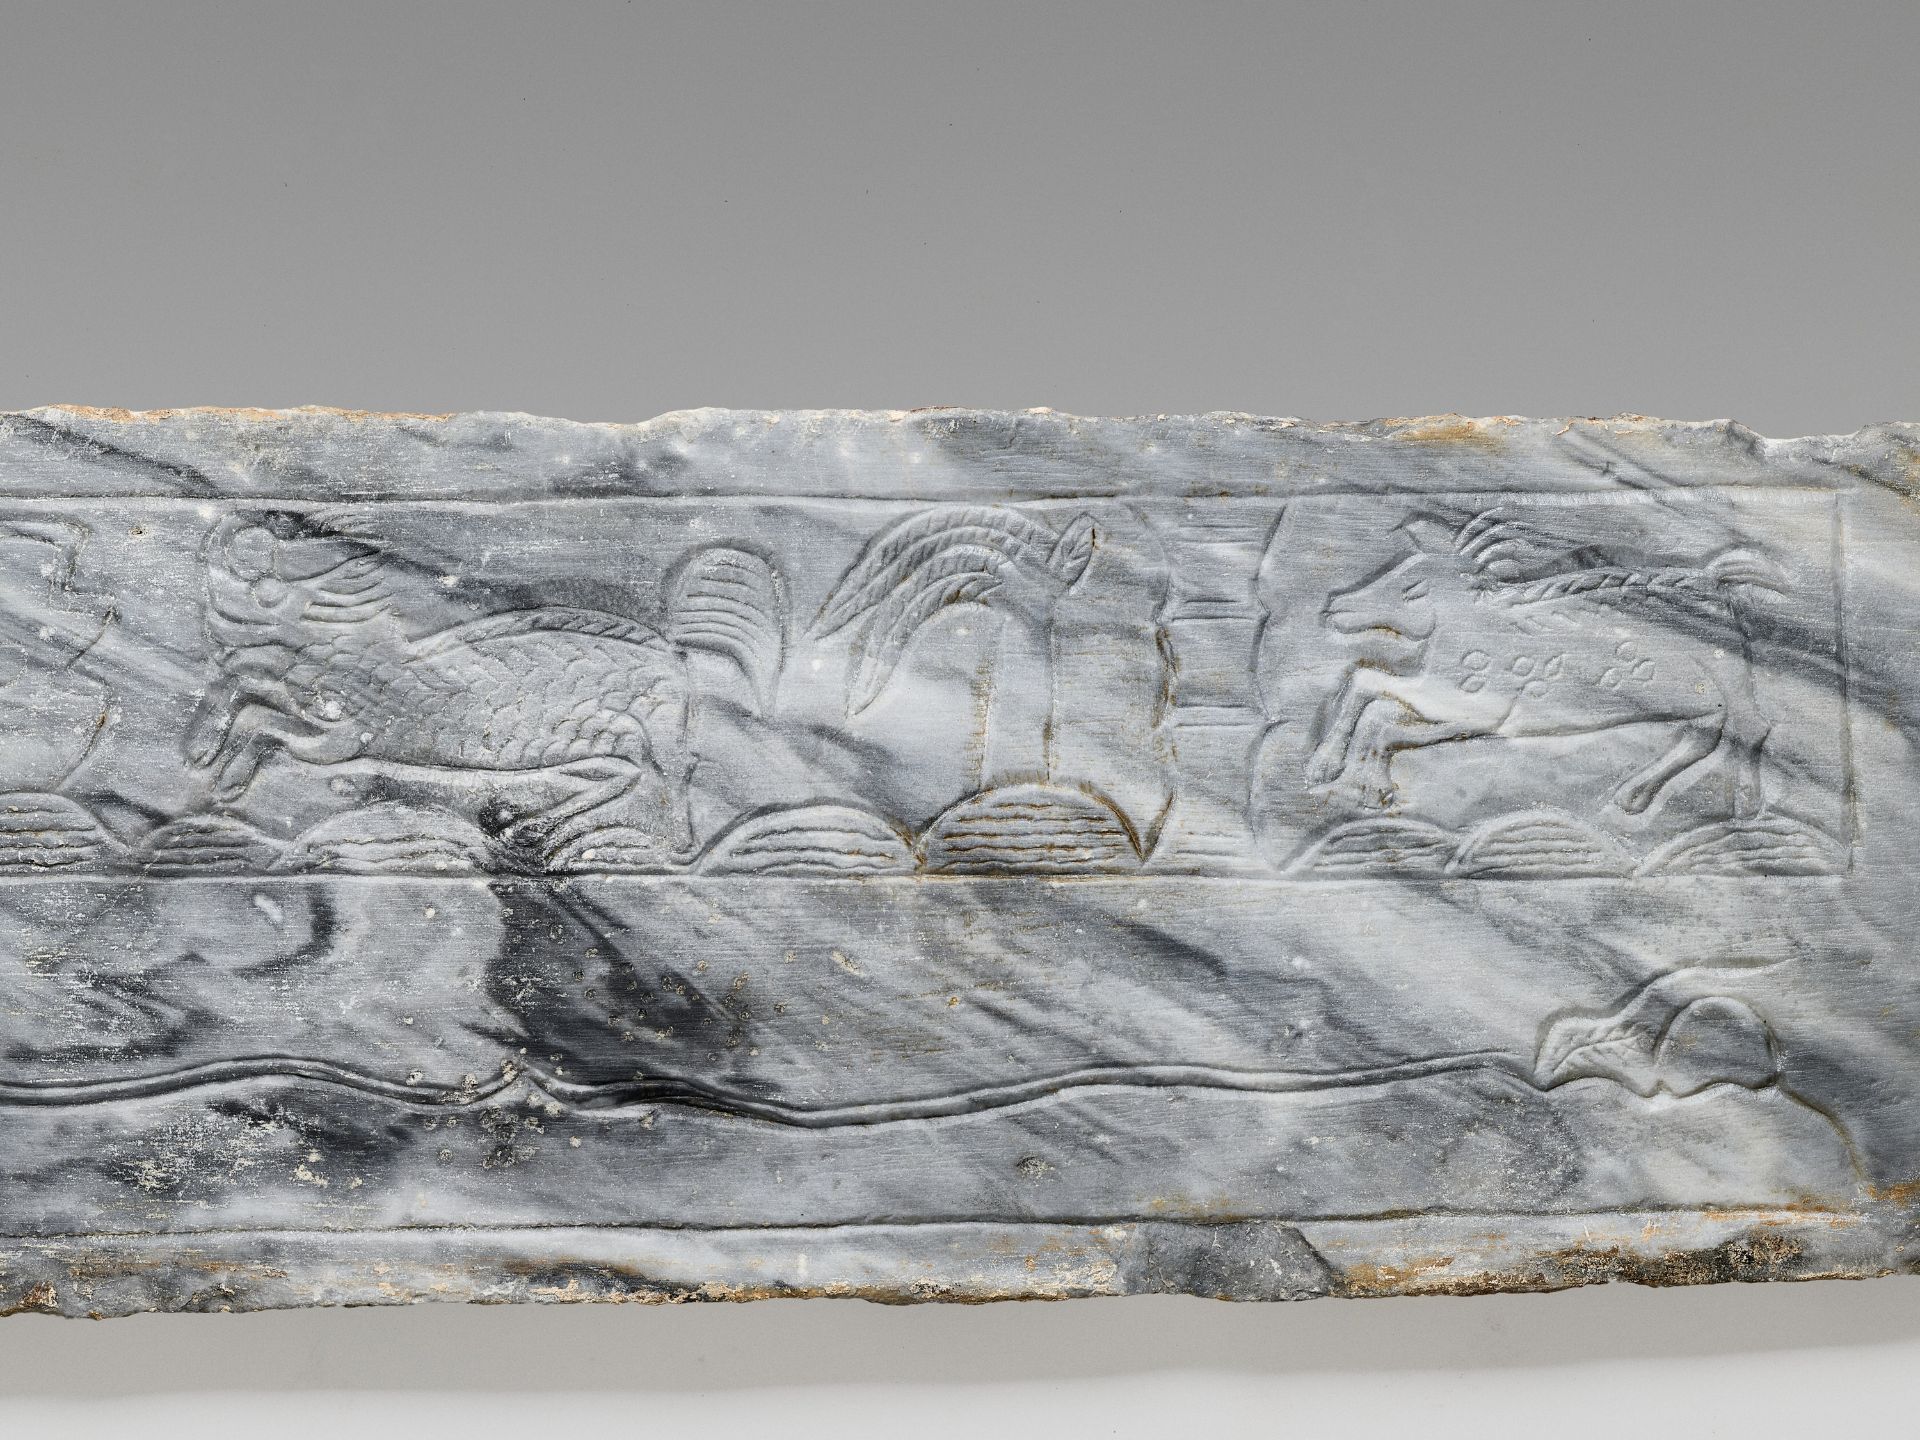 TWO 'MYTHICAL BEAST' MARBLE PANELS, FRAGMENTS OF A FUNERARY STRUCTURE, TANG TO JIN DYNASTY - Image 2 of 9